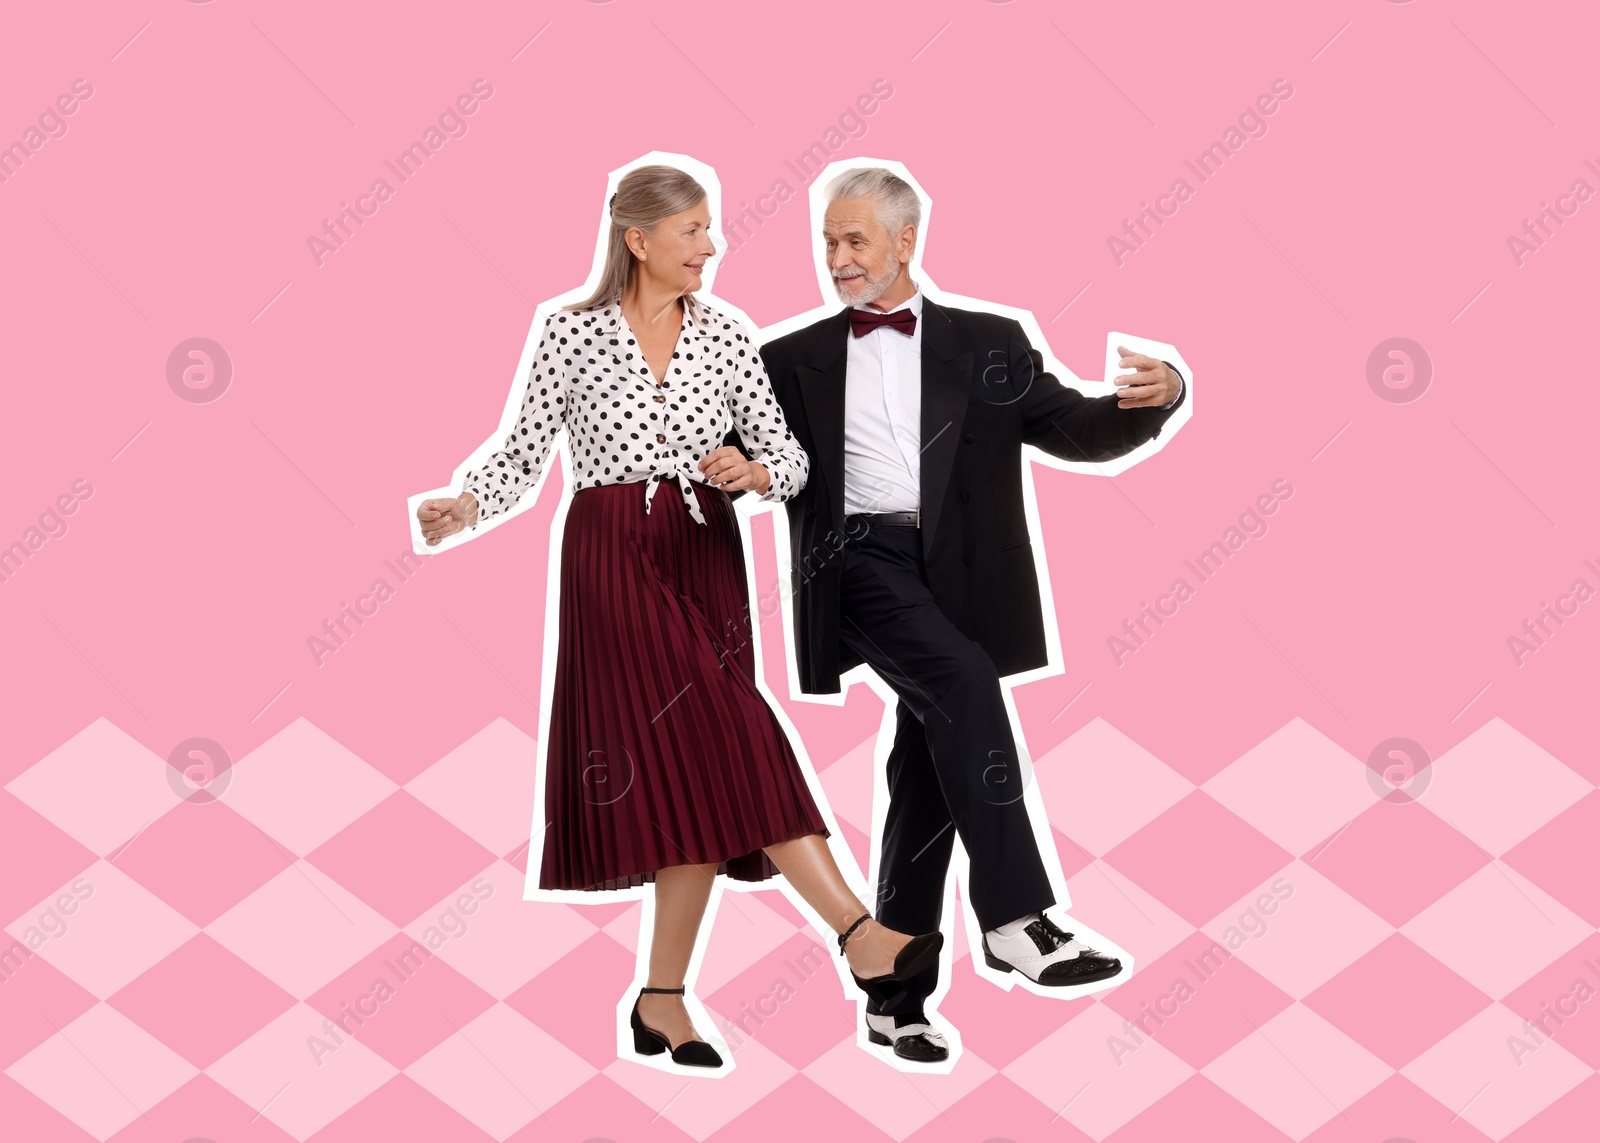 Image of Pop art poster. Couple dancing on pink background, pin up style